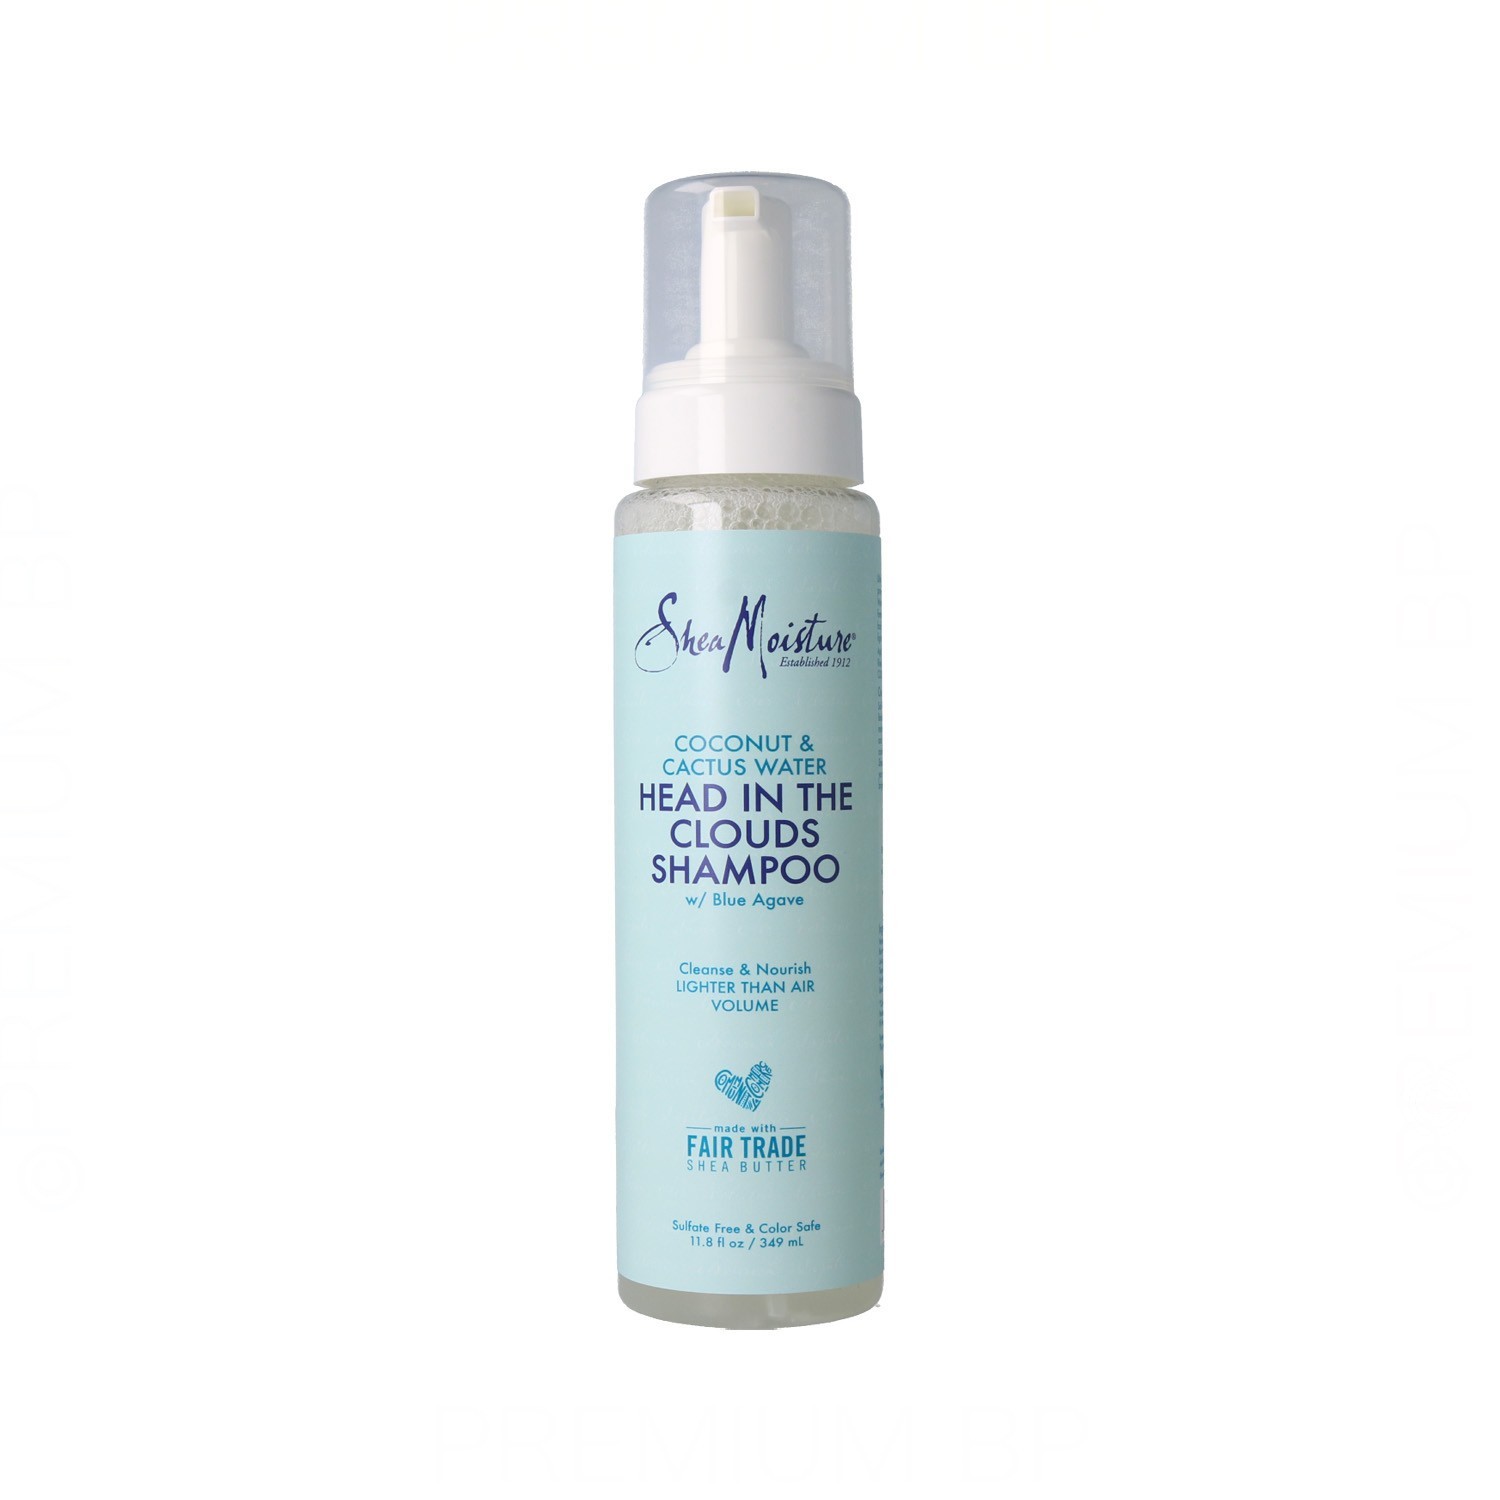 Shea Moisture Cactus & Coconut Water Head In The Clouds Shampooing 11.8OZ/349 ml